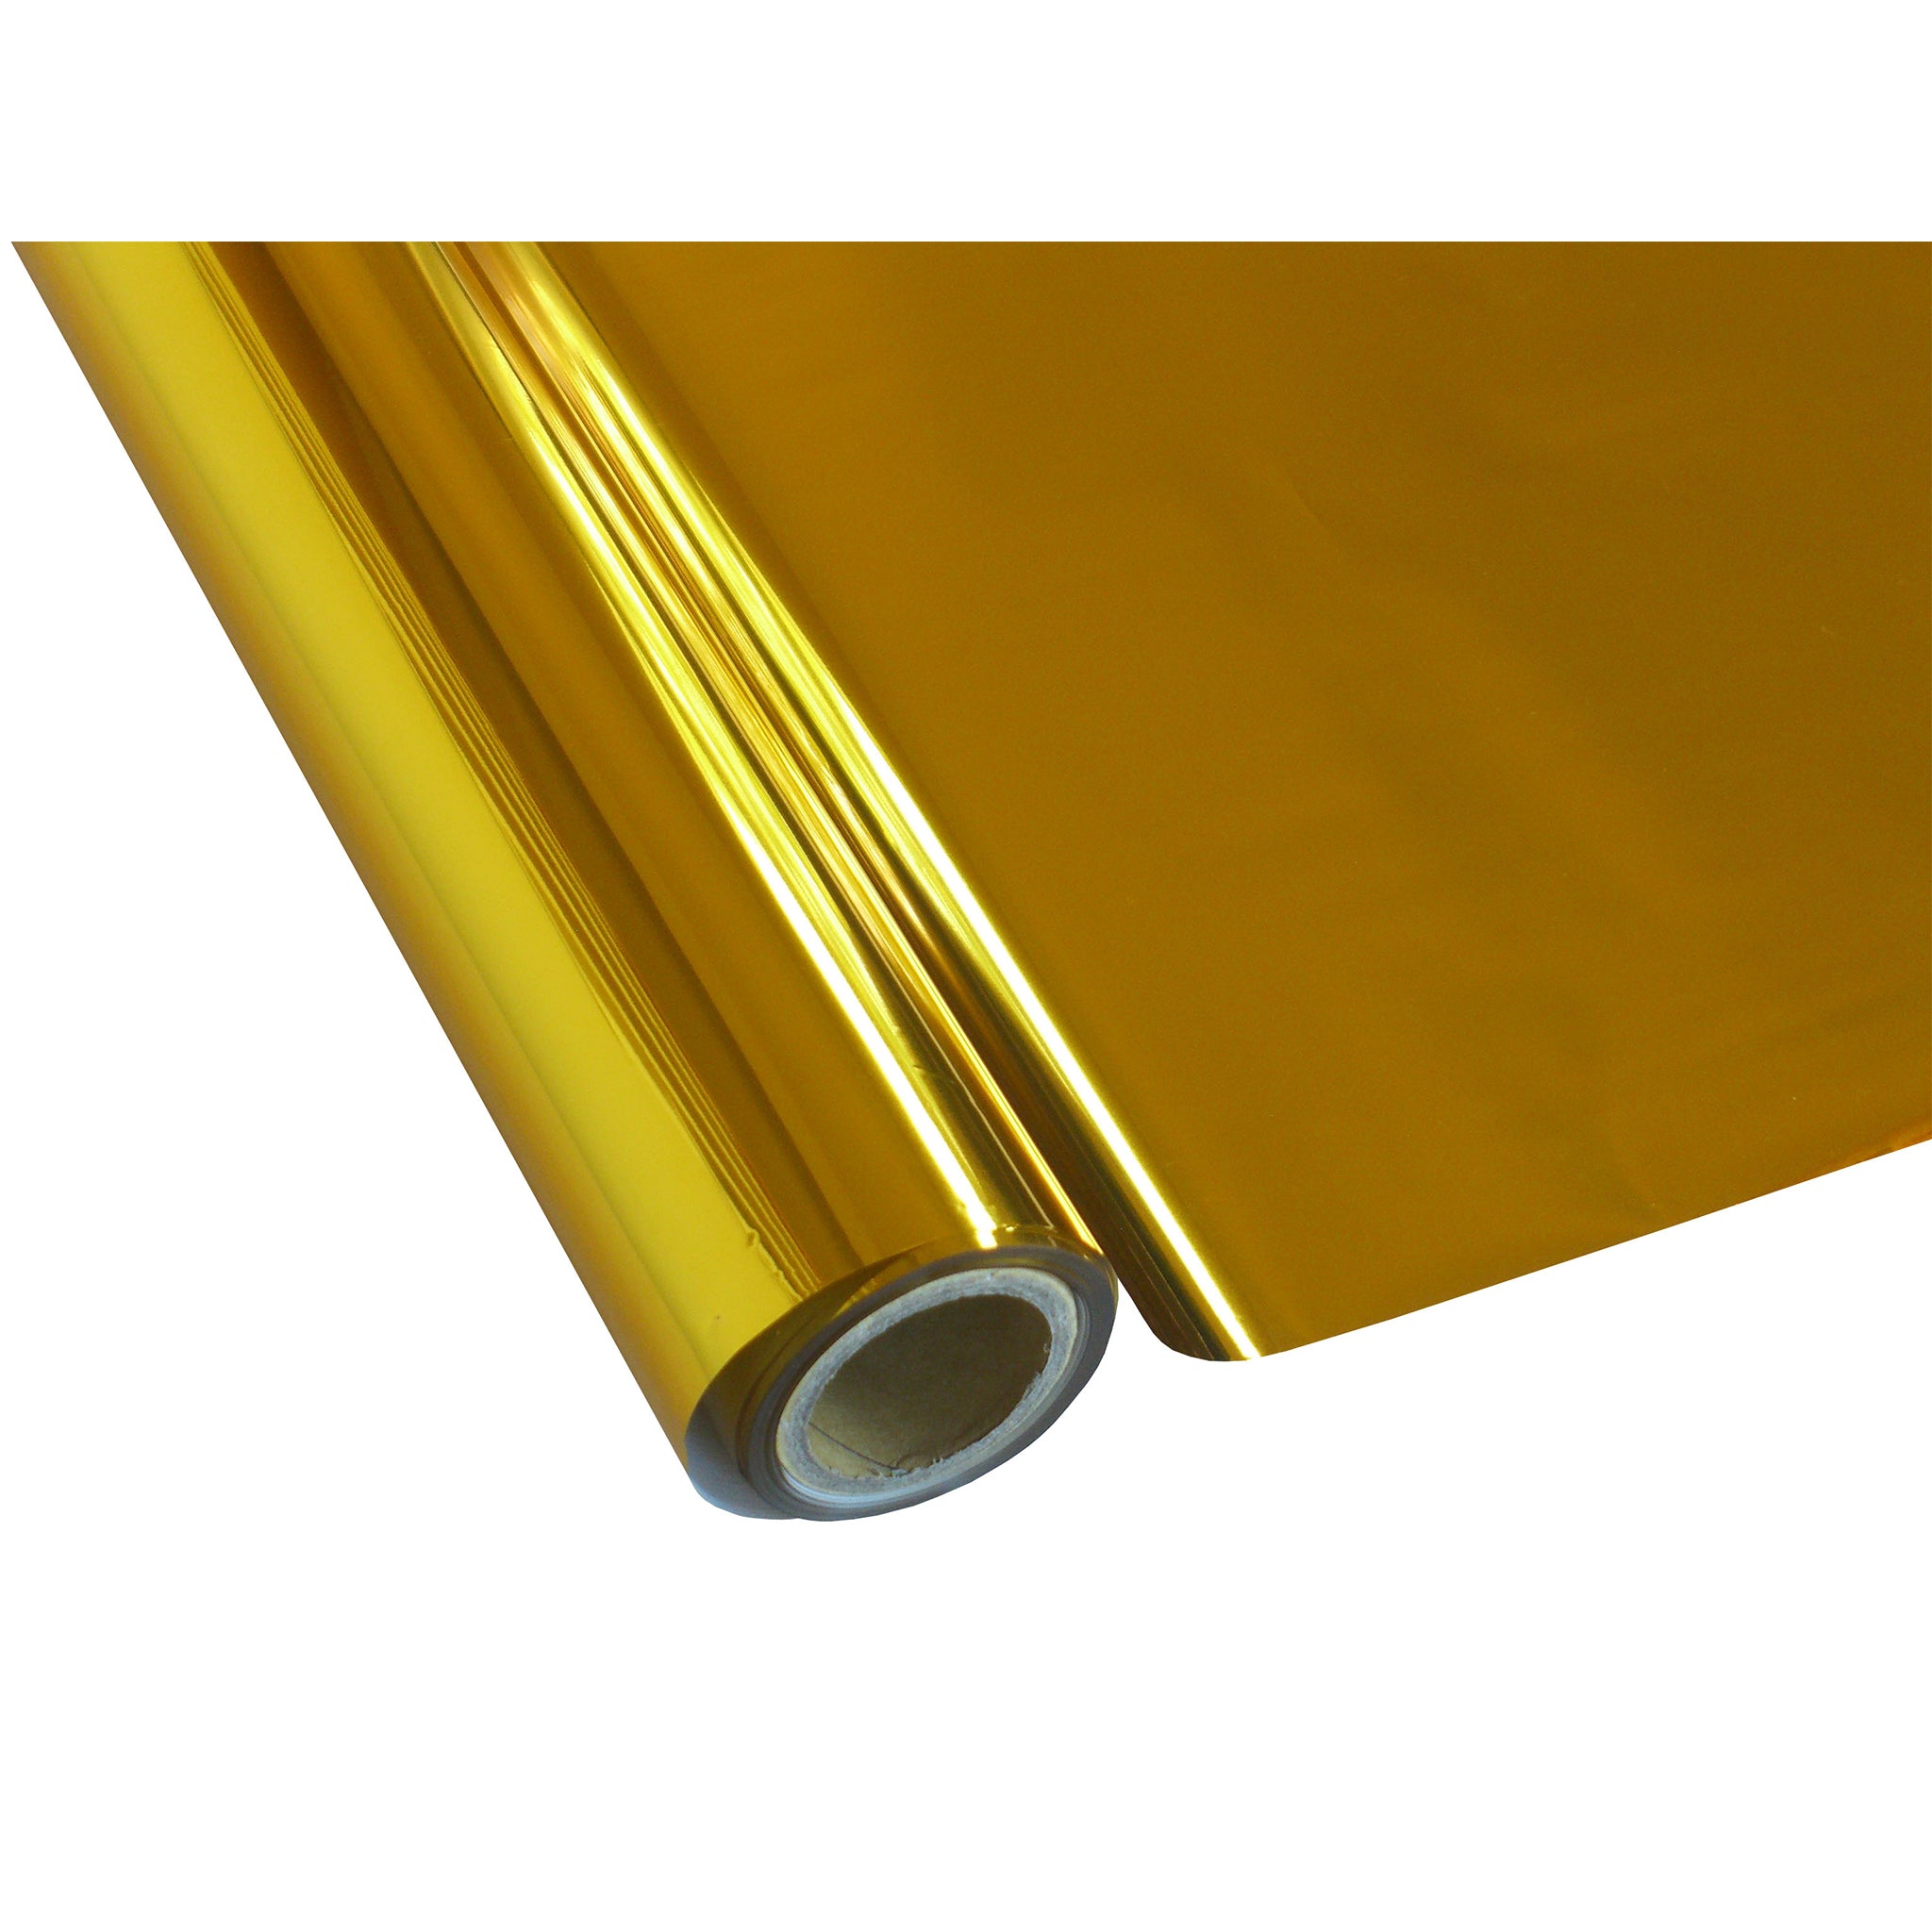 25 Foot Roll of 12" StarCraft Electra Foil - Yellow Gold